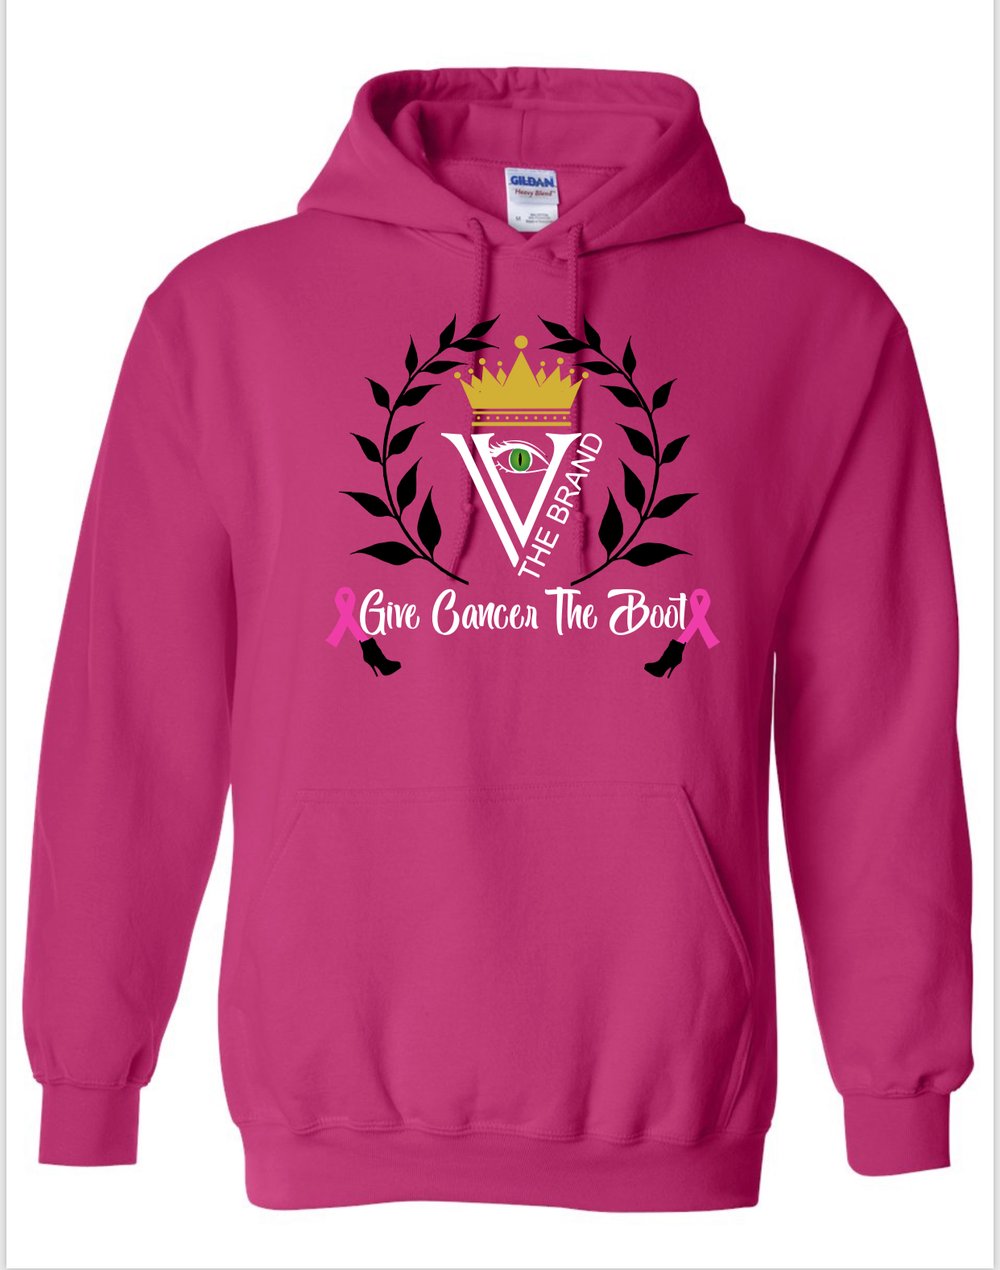 The League Hoodies "Give Cancer The Boot "Pink"